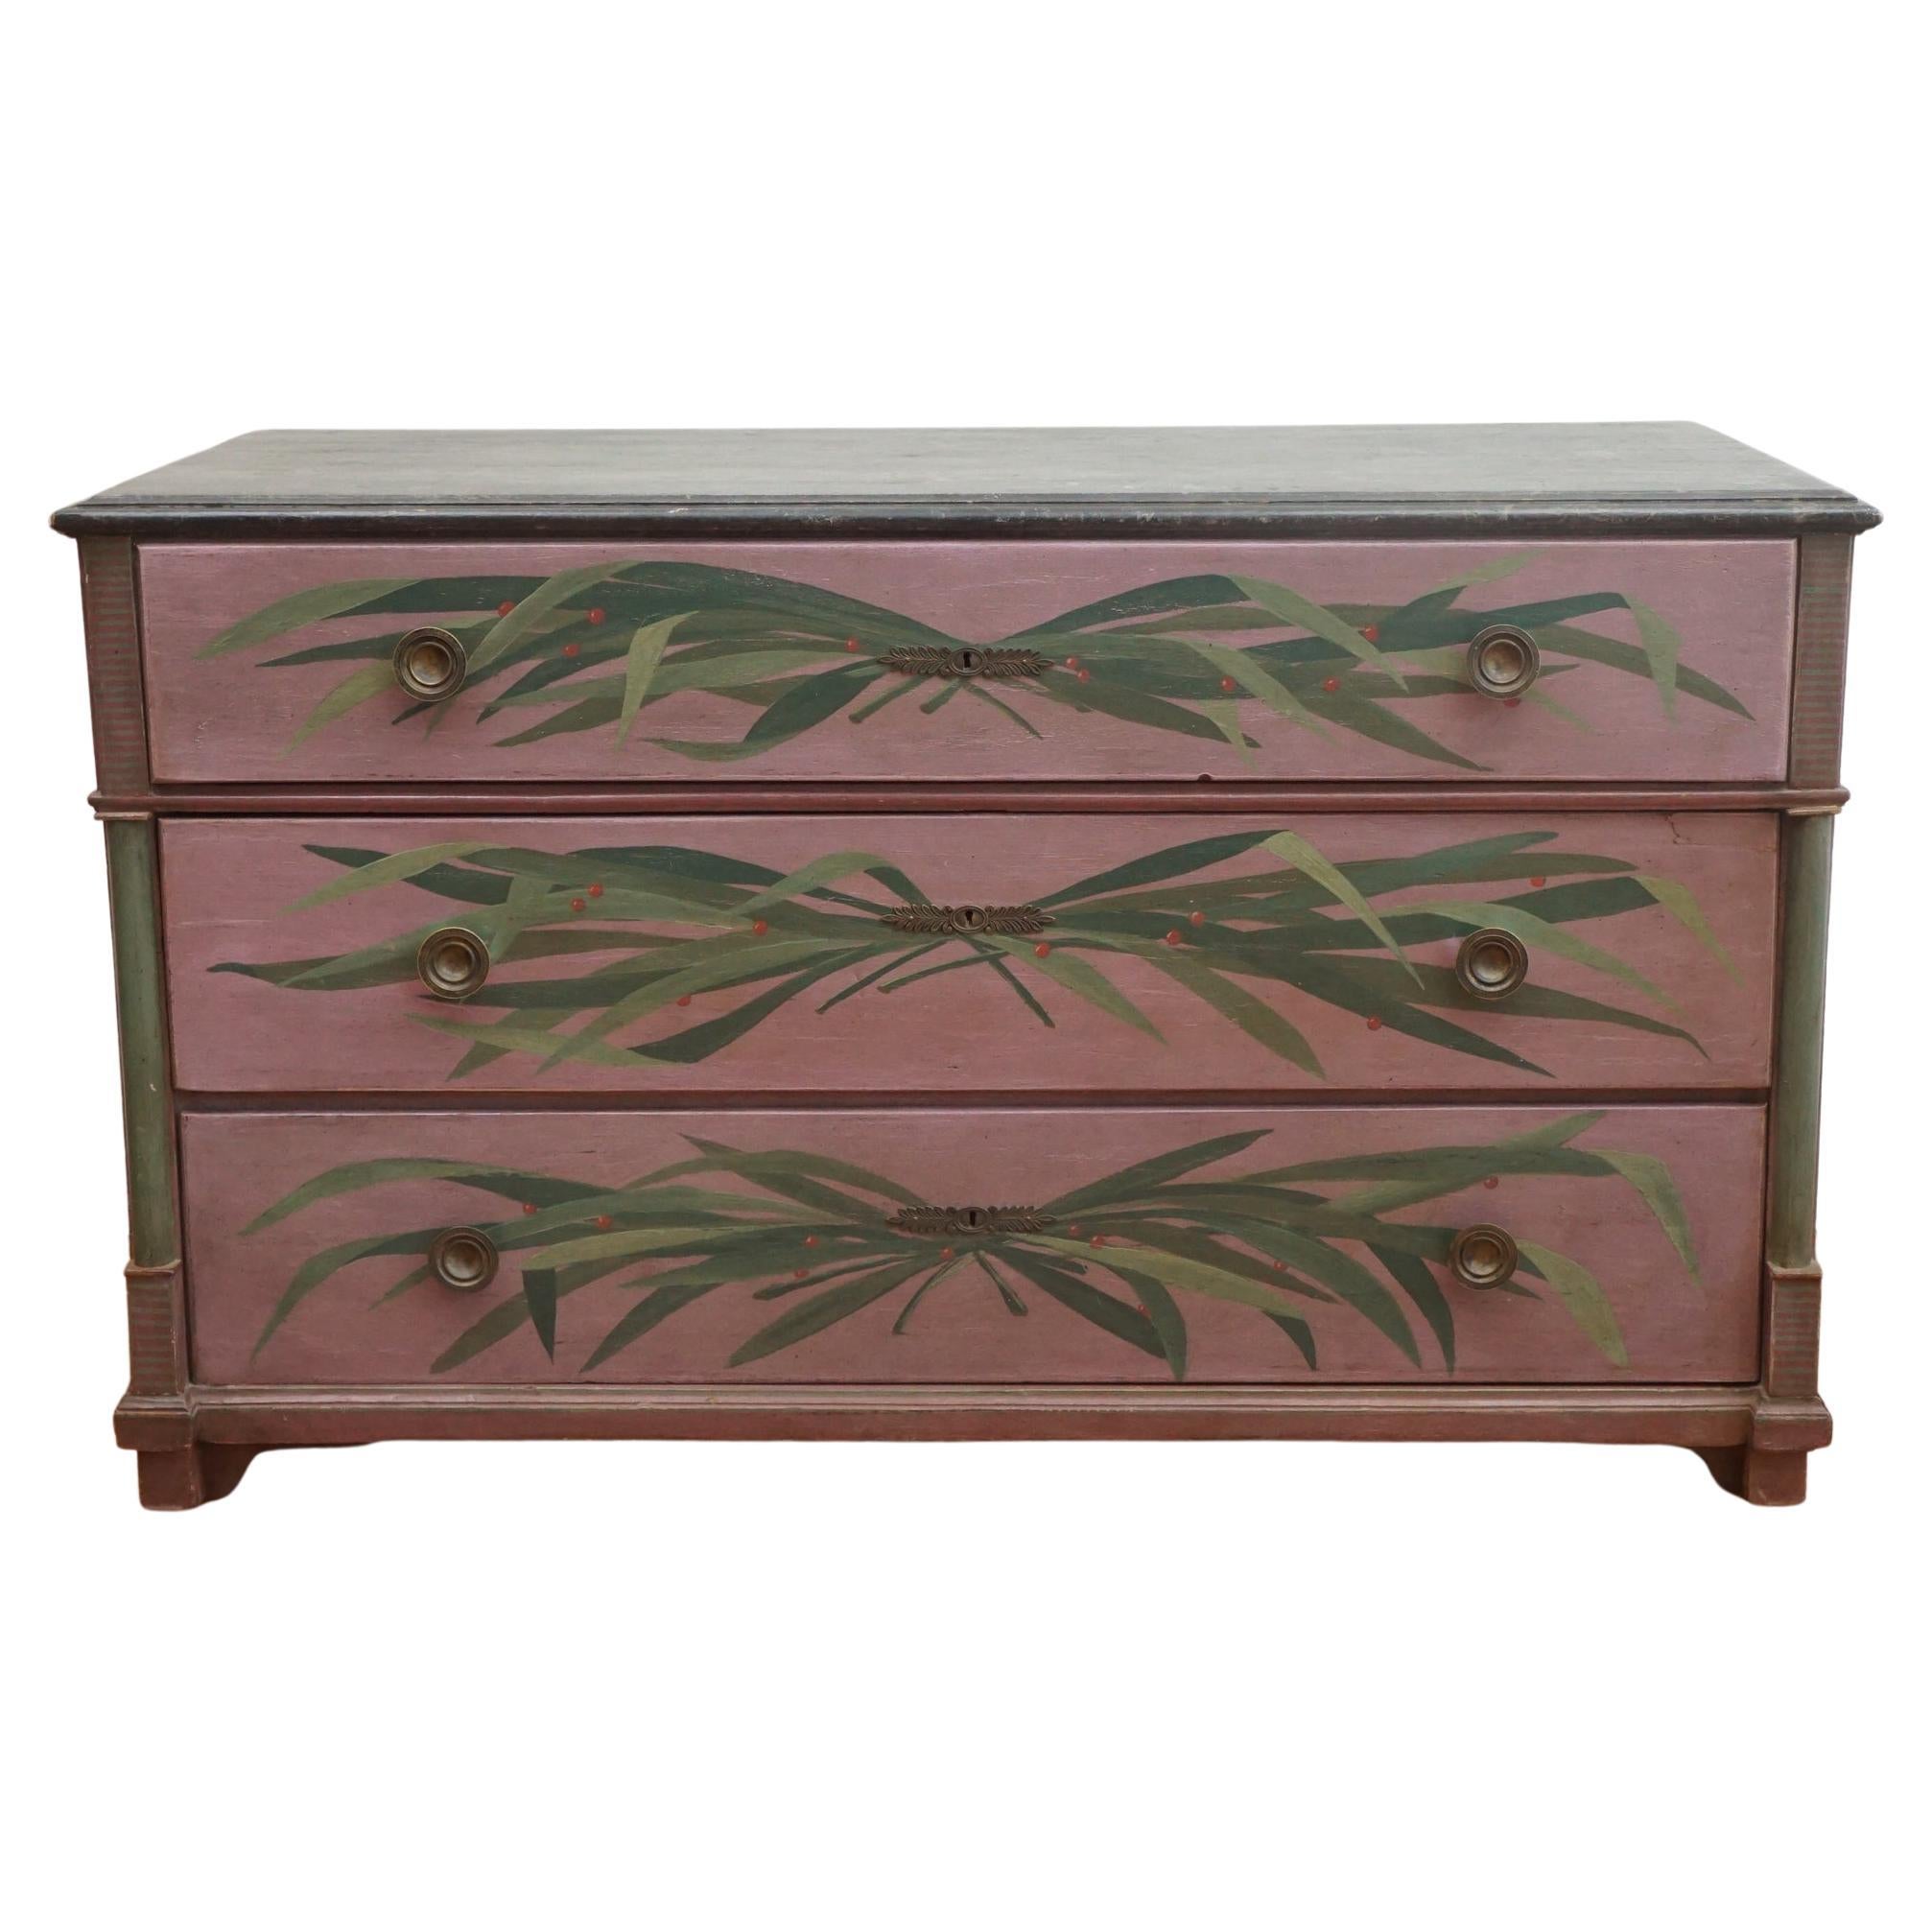 Antique Directoire-Style Painted Commode